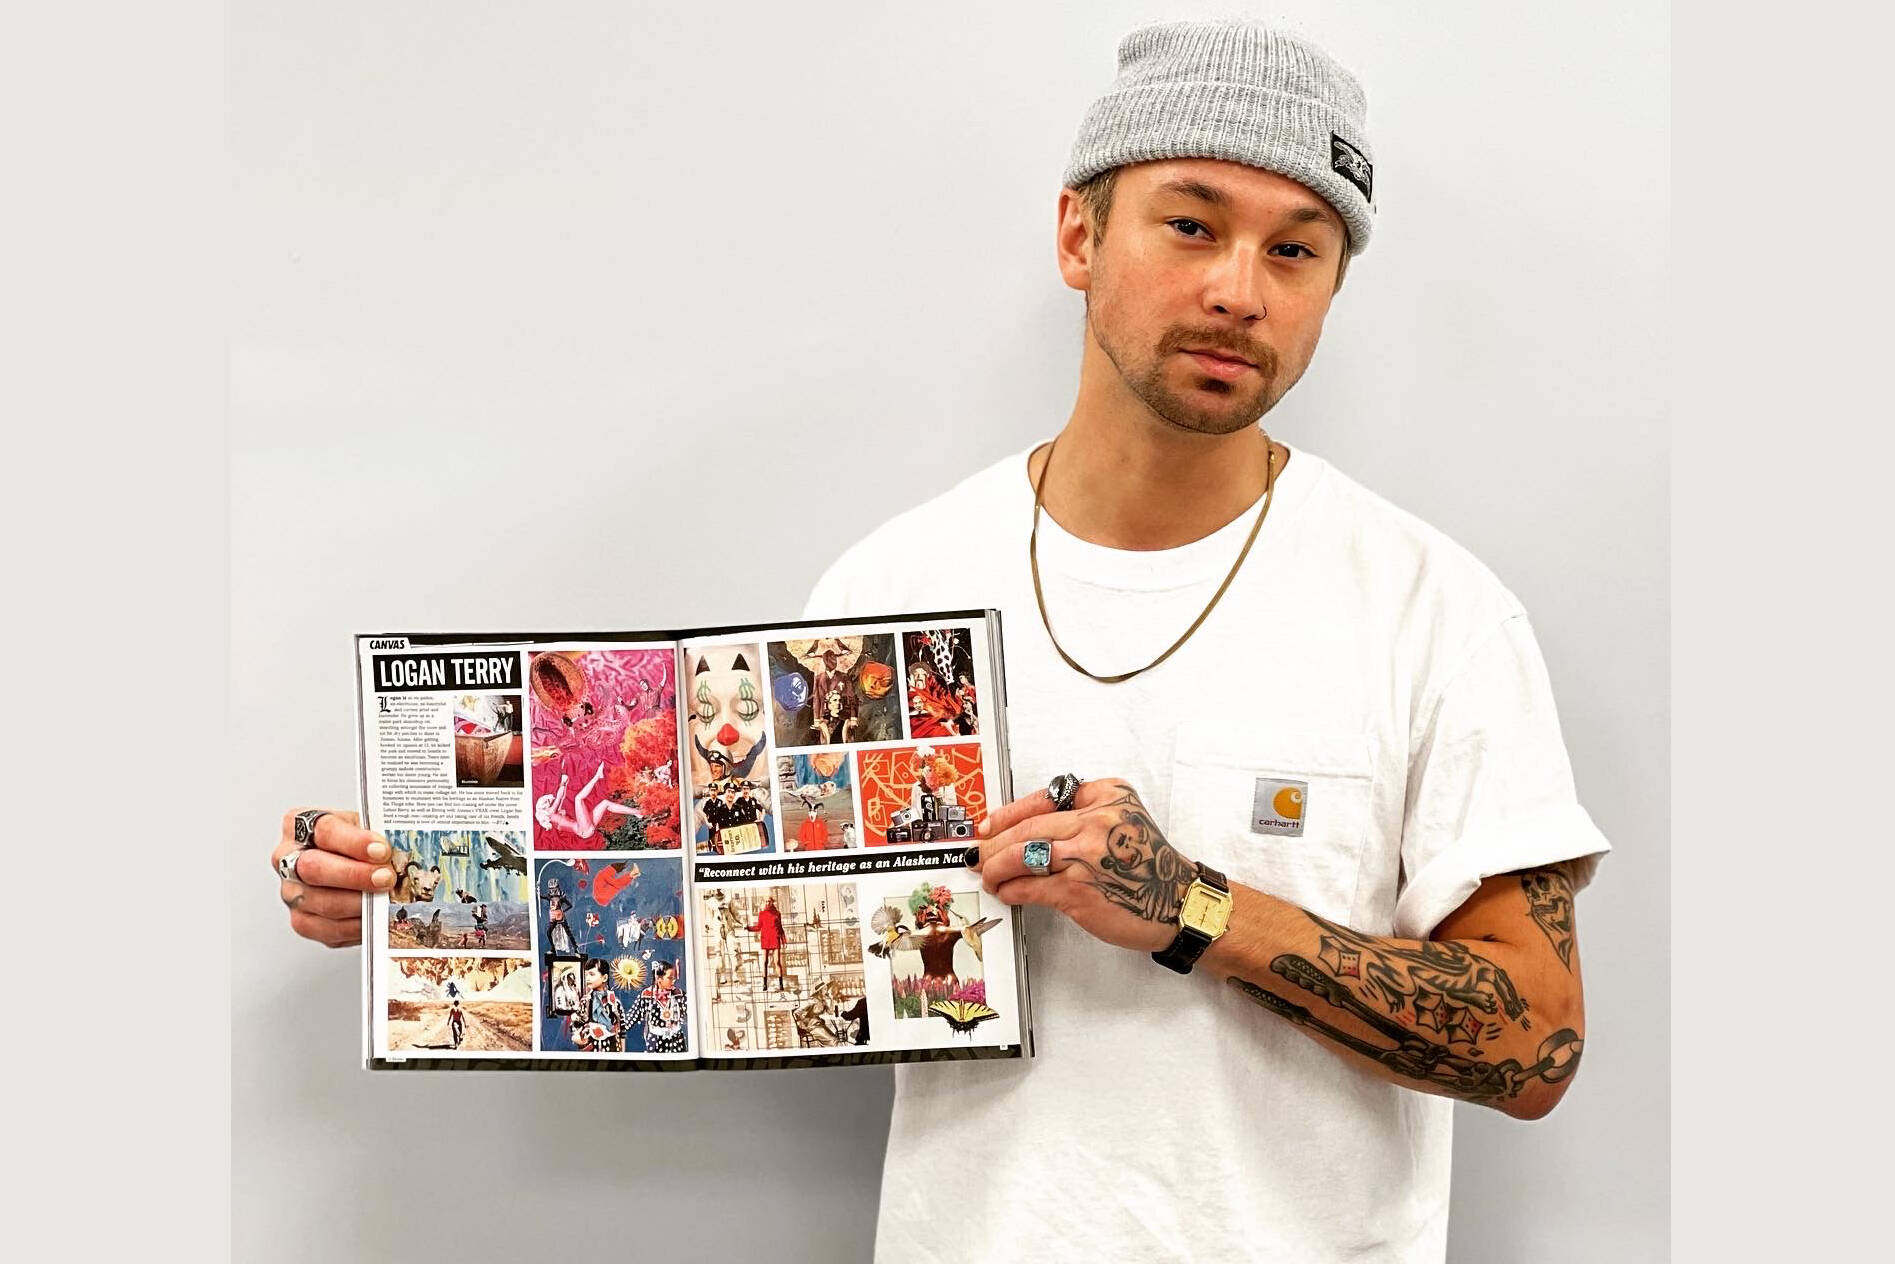 Alaska Native artist Logan Terry holds the latest edition of Thrasher Magazine, displaying the spread of his work as a featured artist for the month. (Courtesy Photo / Patrick Vanpool)